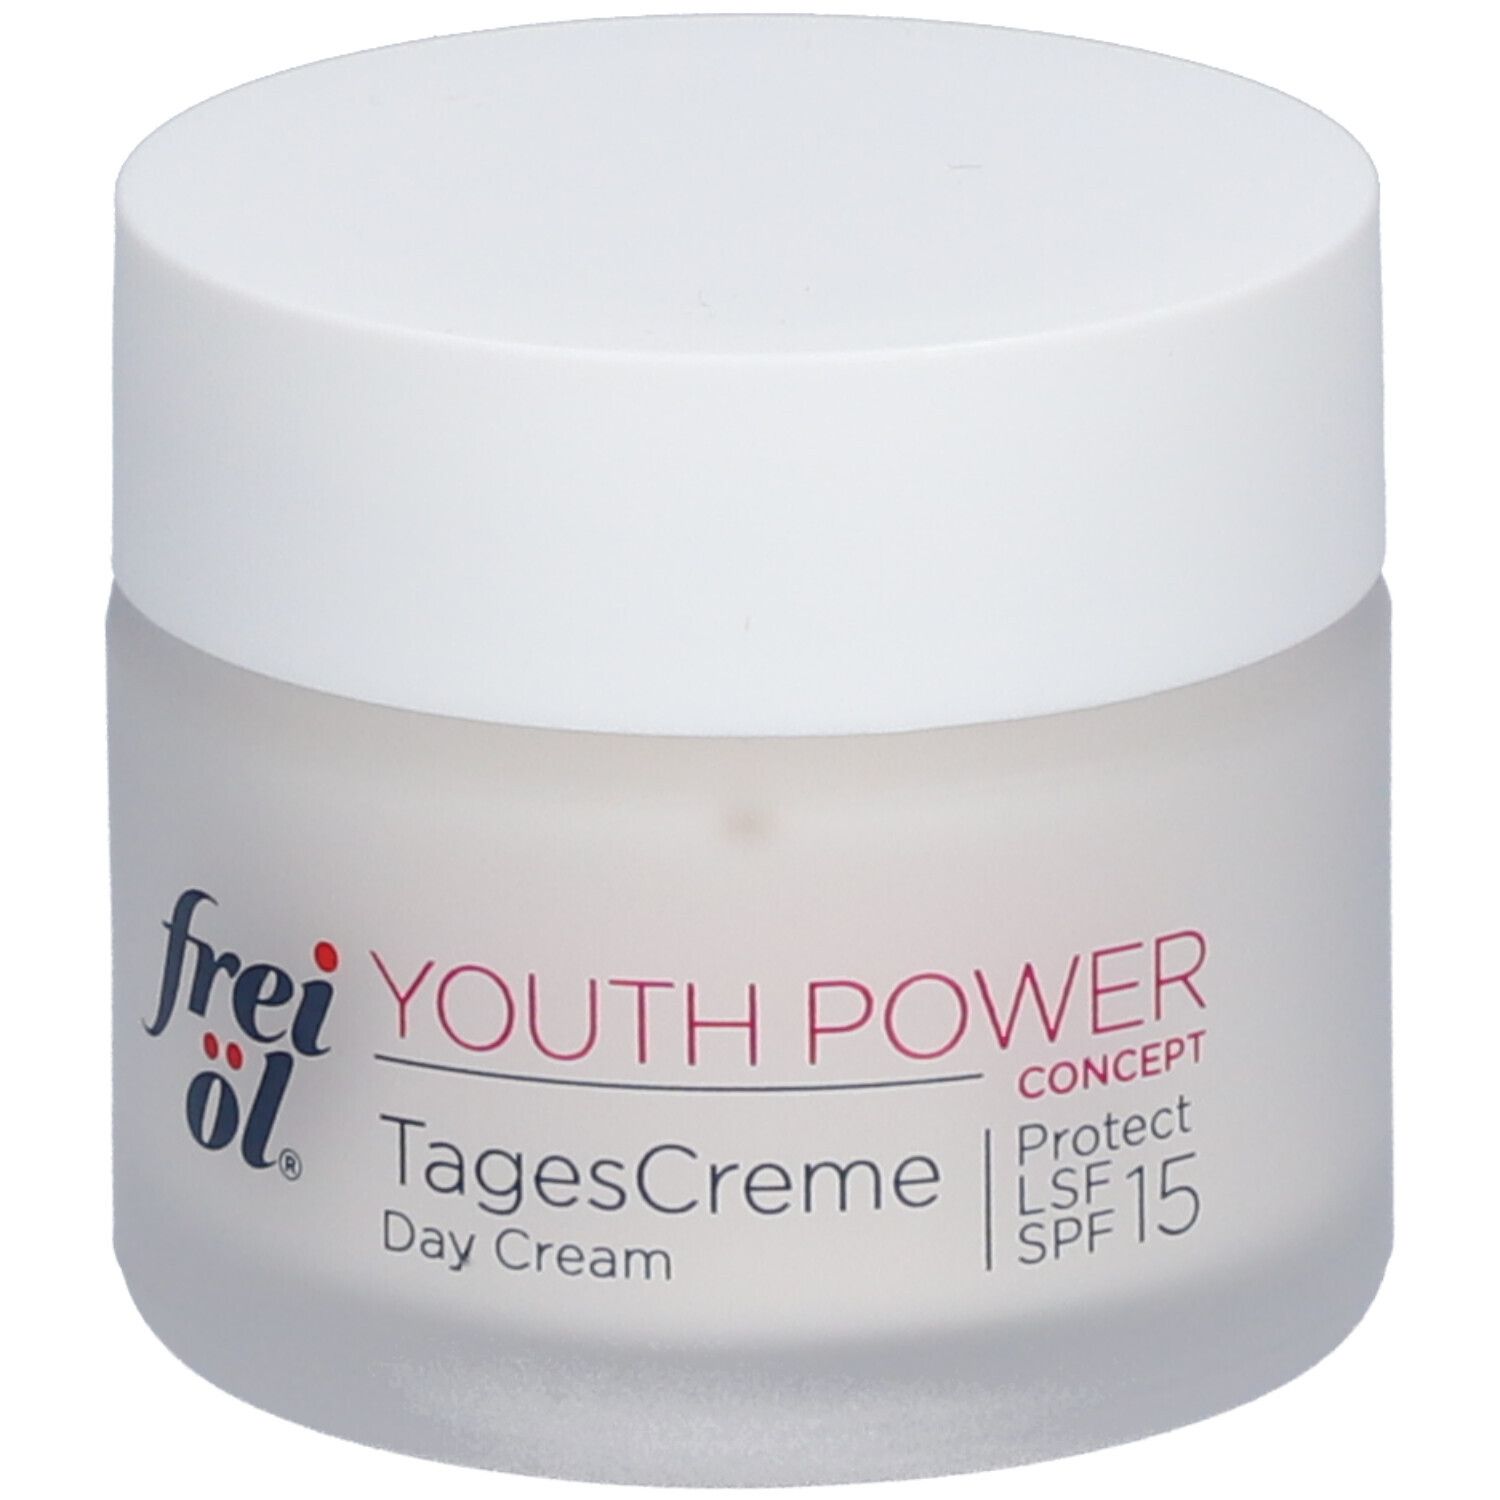 frei öl® Youth Power Concept TagesCreme Protect LSF 15